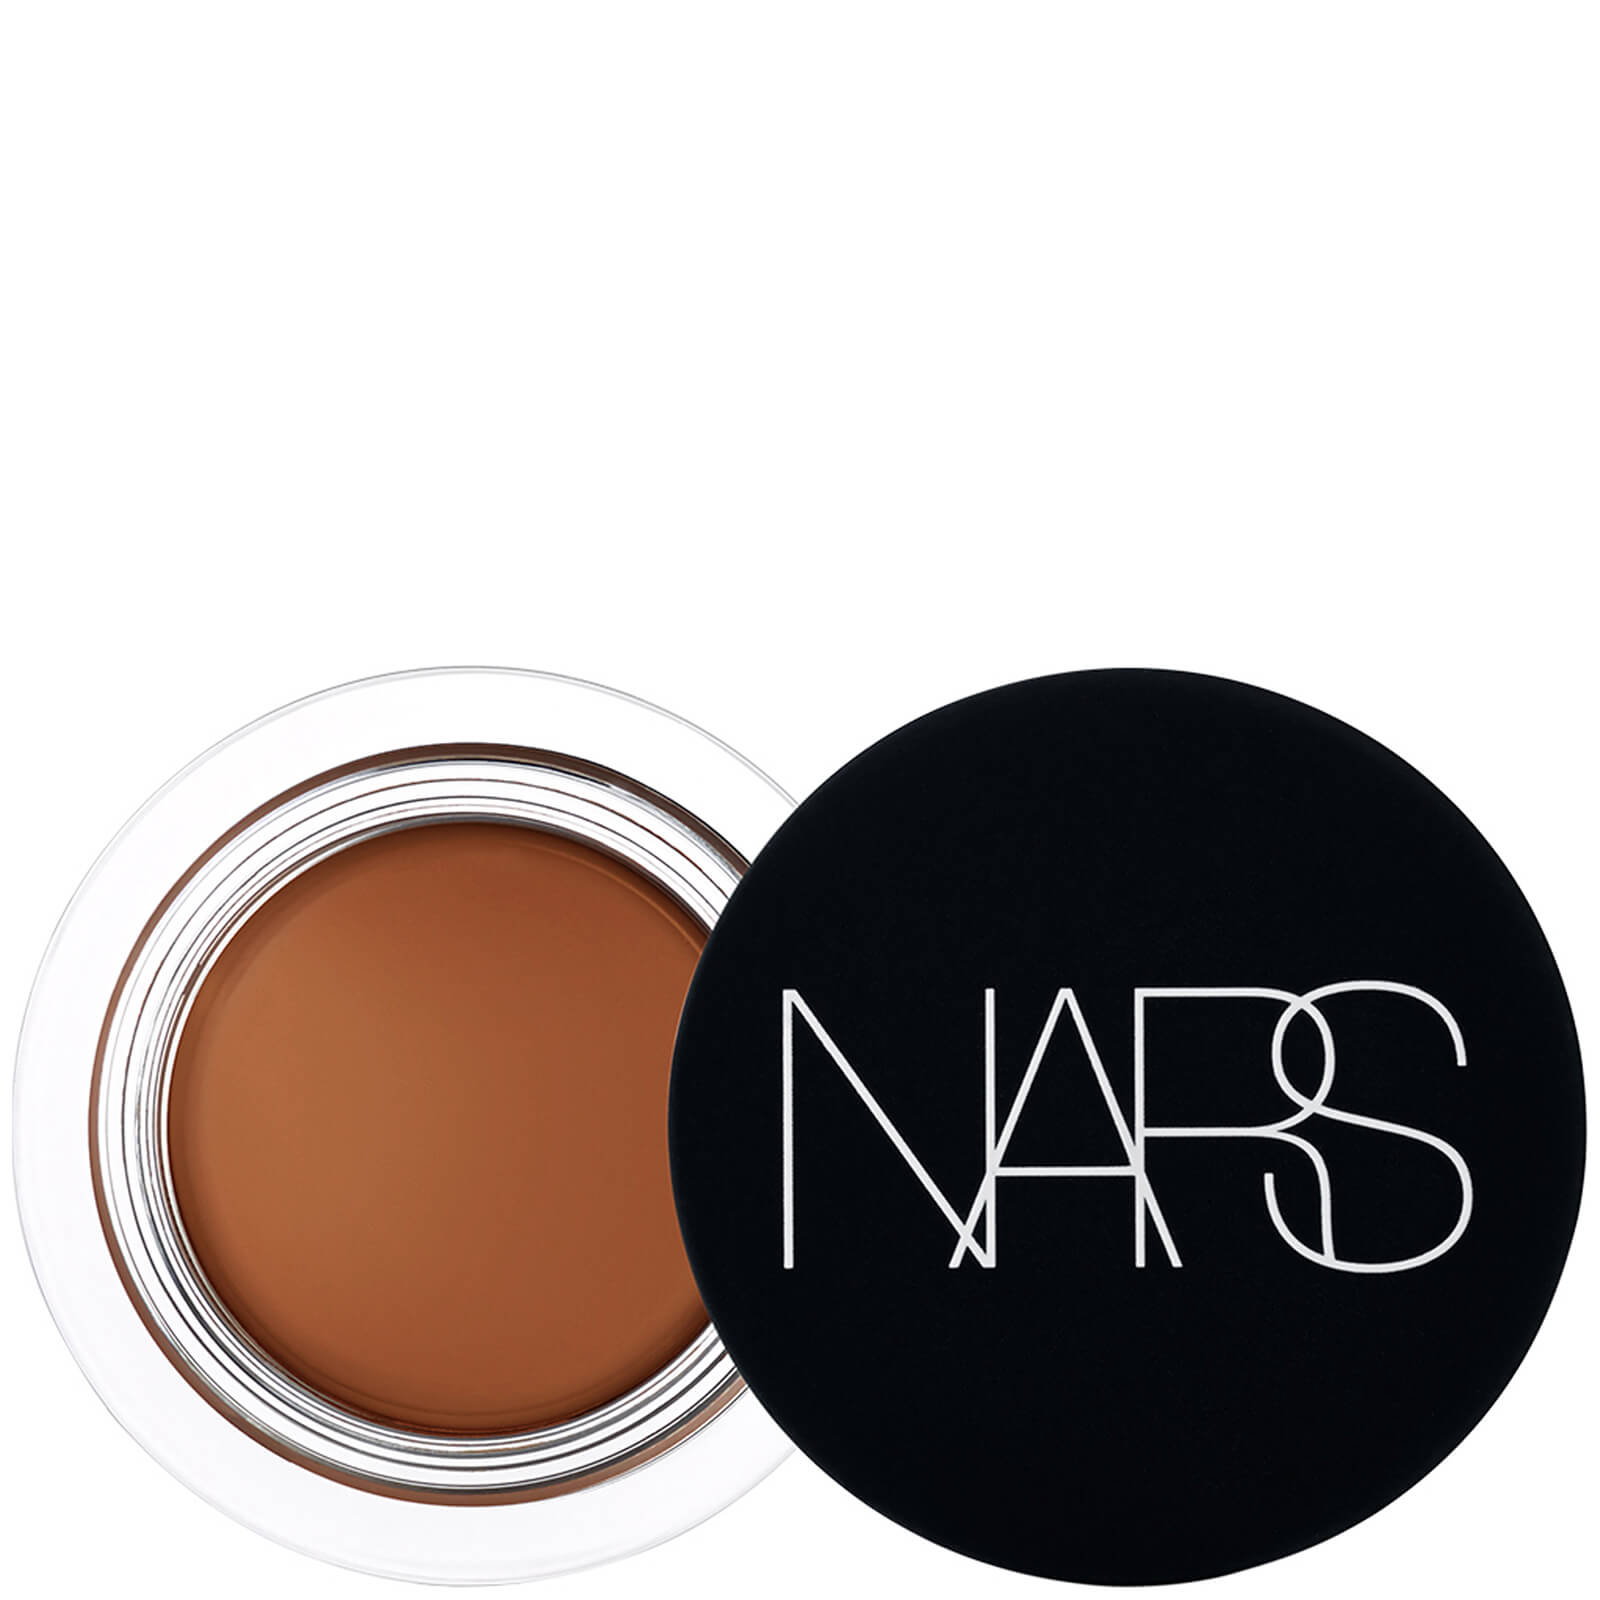 NARS Soft Matte Complete Concealer 6.2g (Various Shades) - Cacao